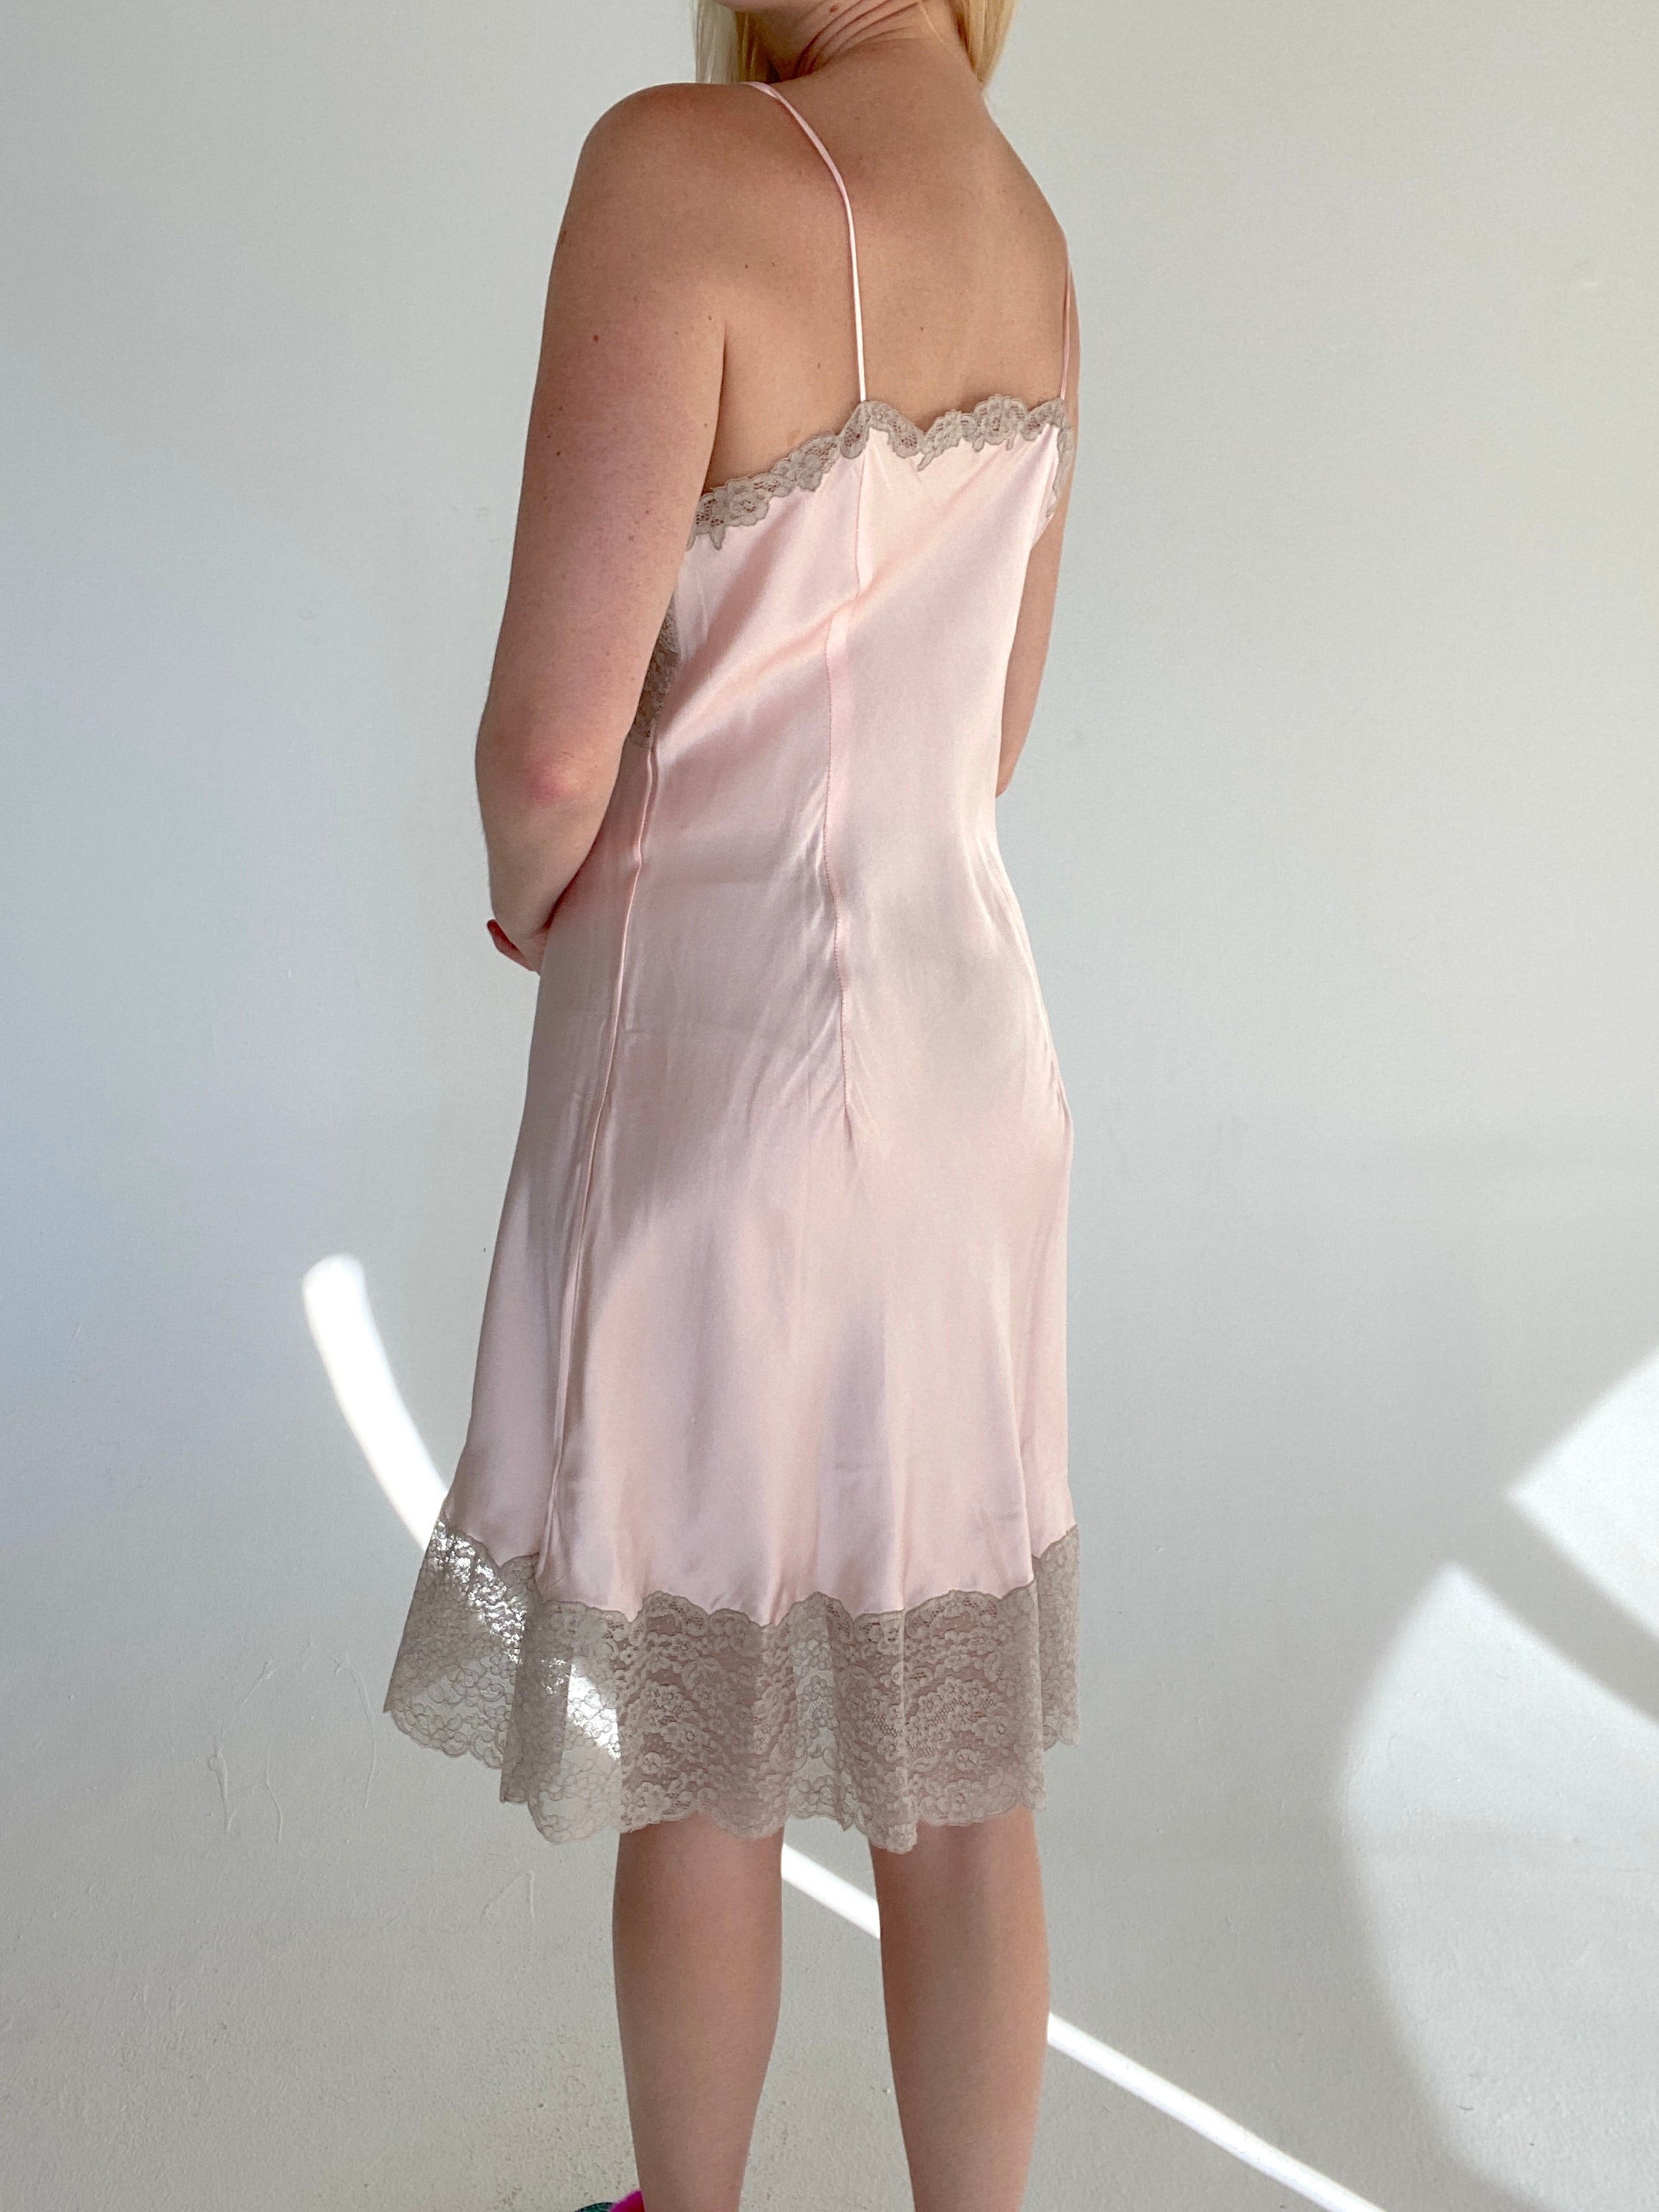 1940's Pink Silk Slip with Cream Lace